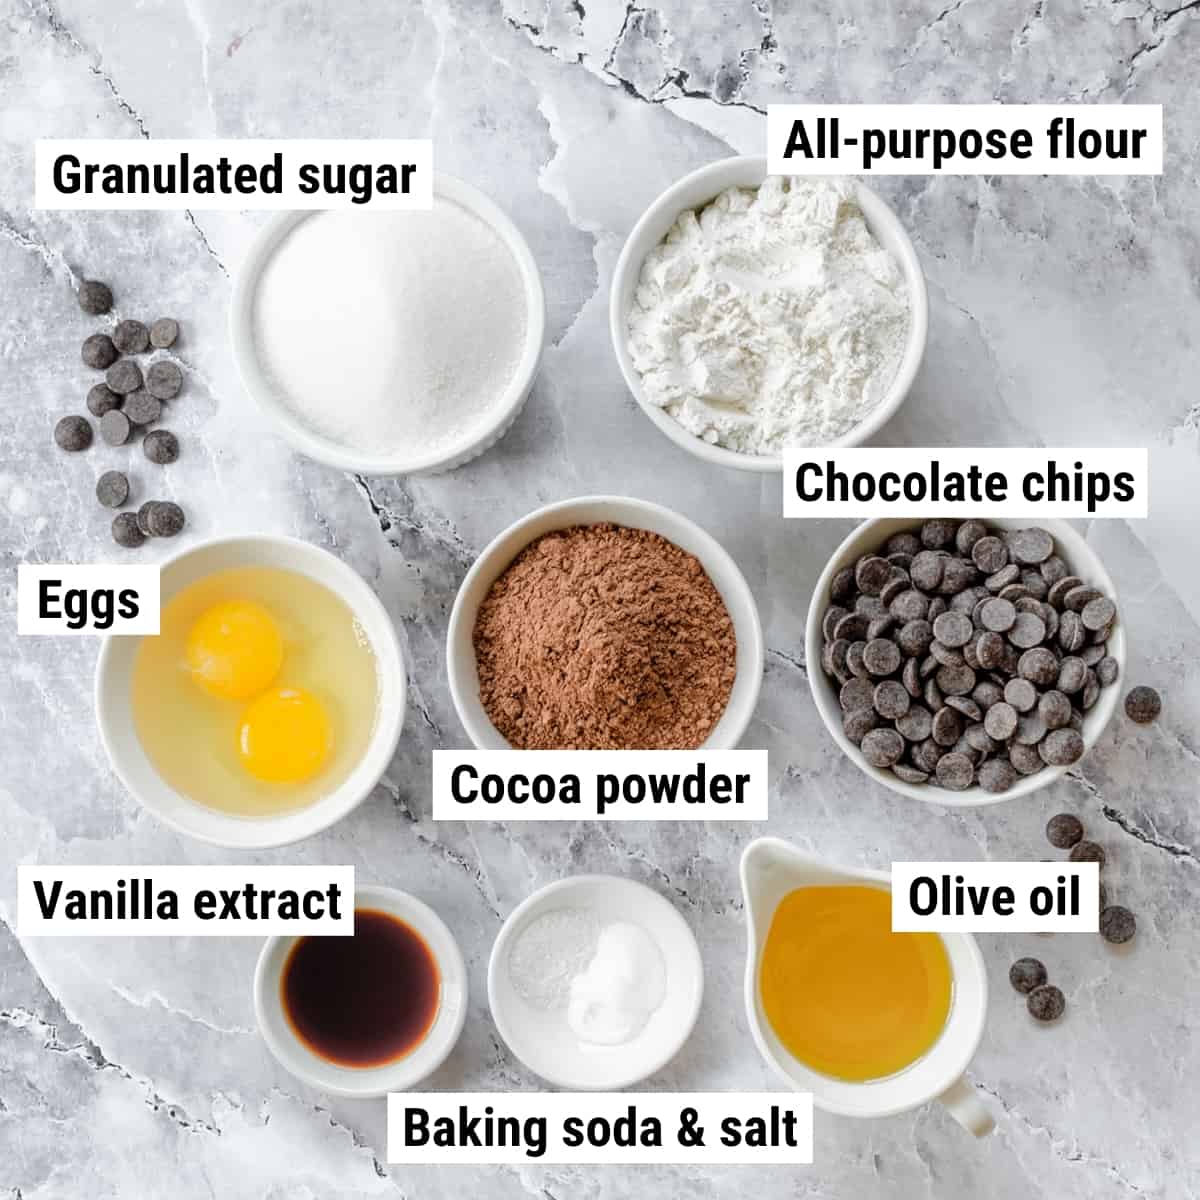 The ingredients needed to make dairy free brownies spread out on a table.